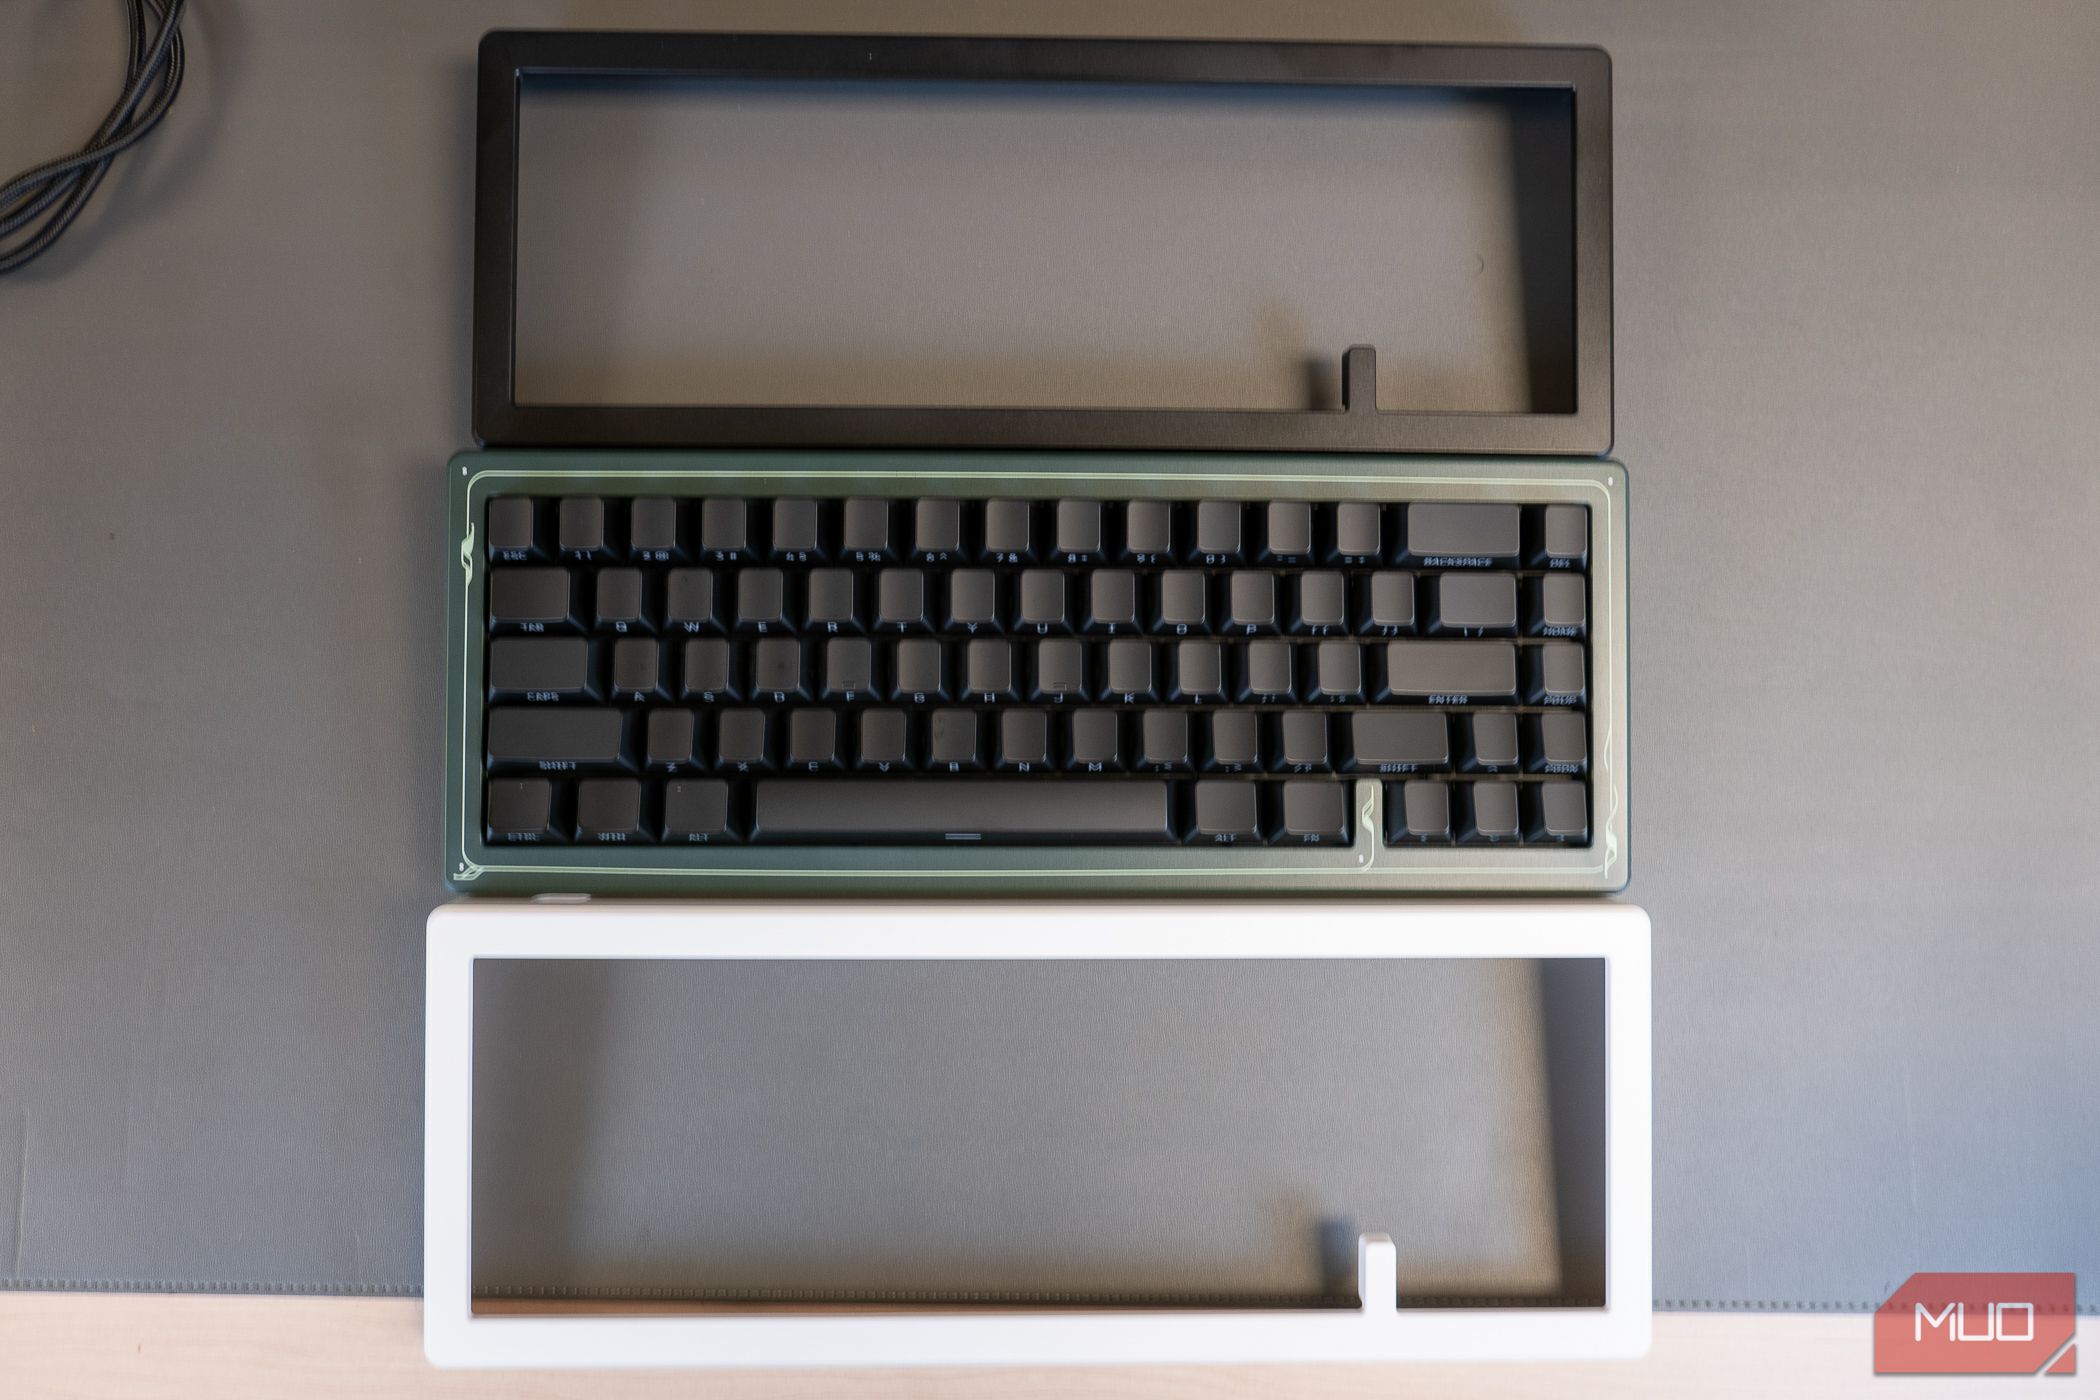 Custom covers are available for the keyboard